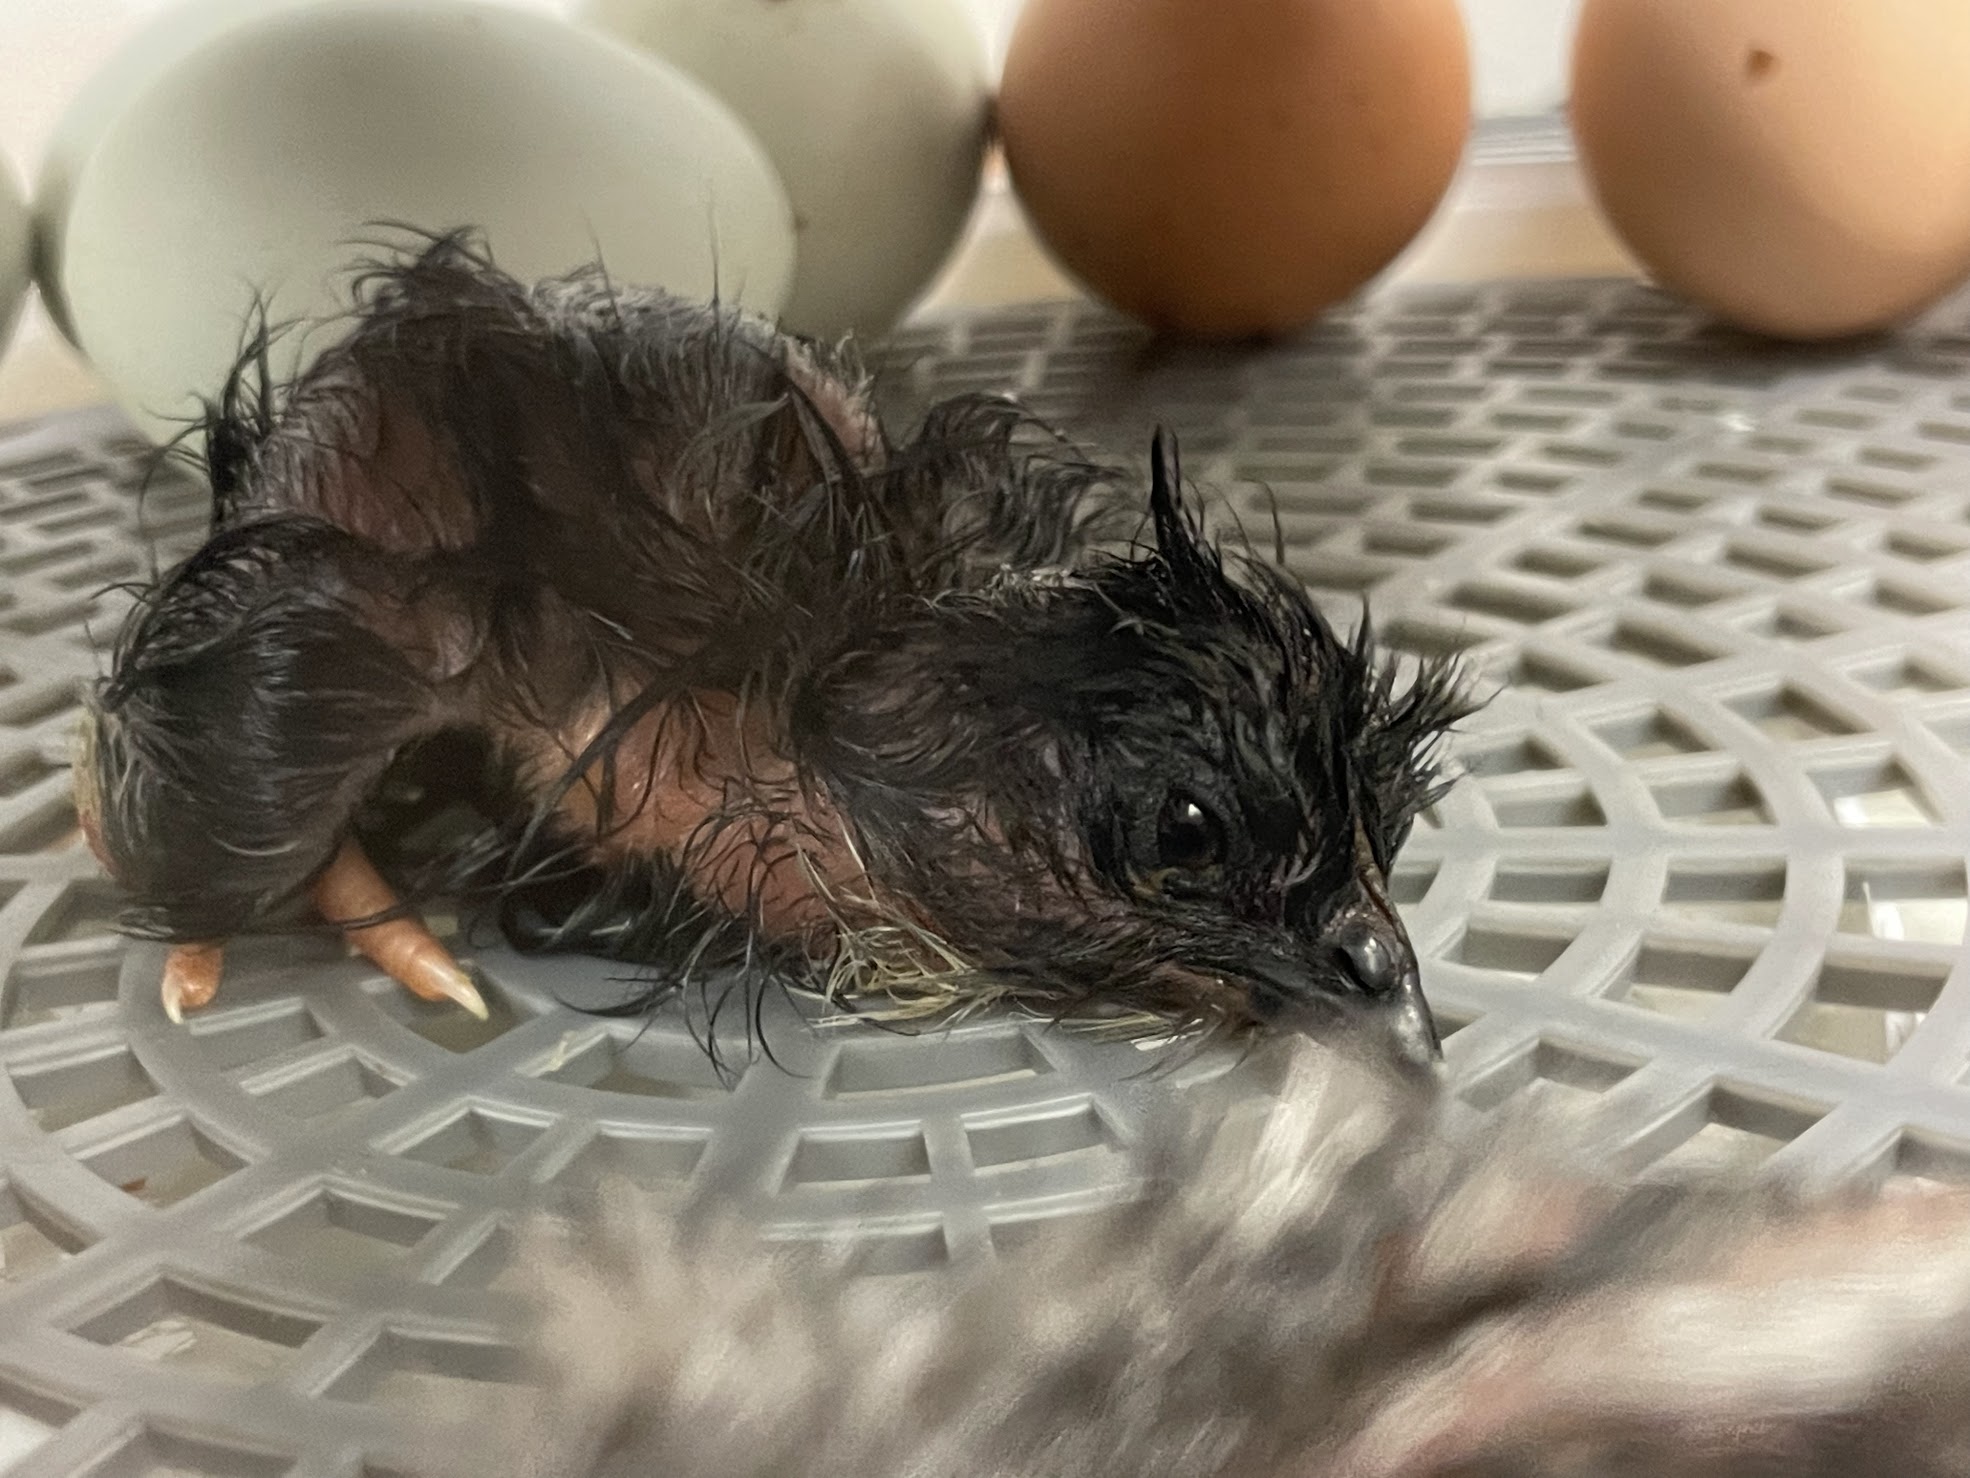 A newly born chick in an incubator.